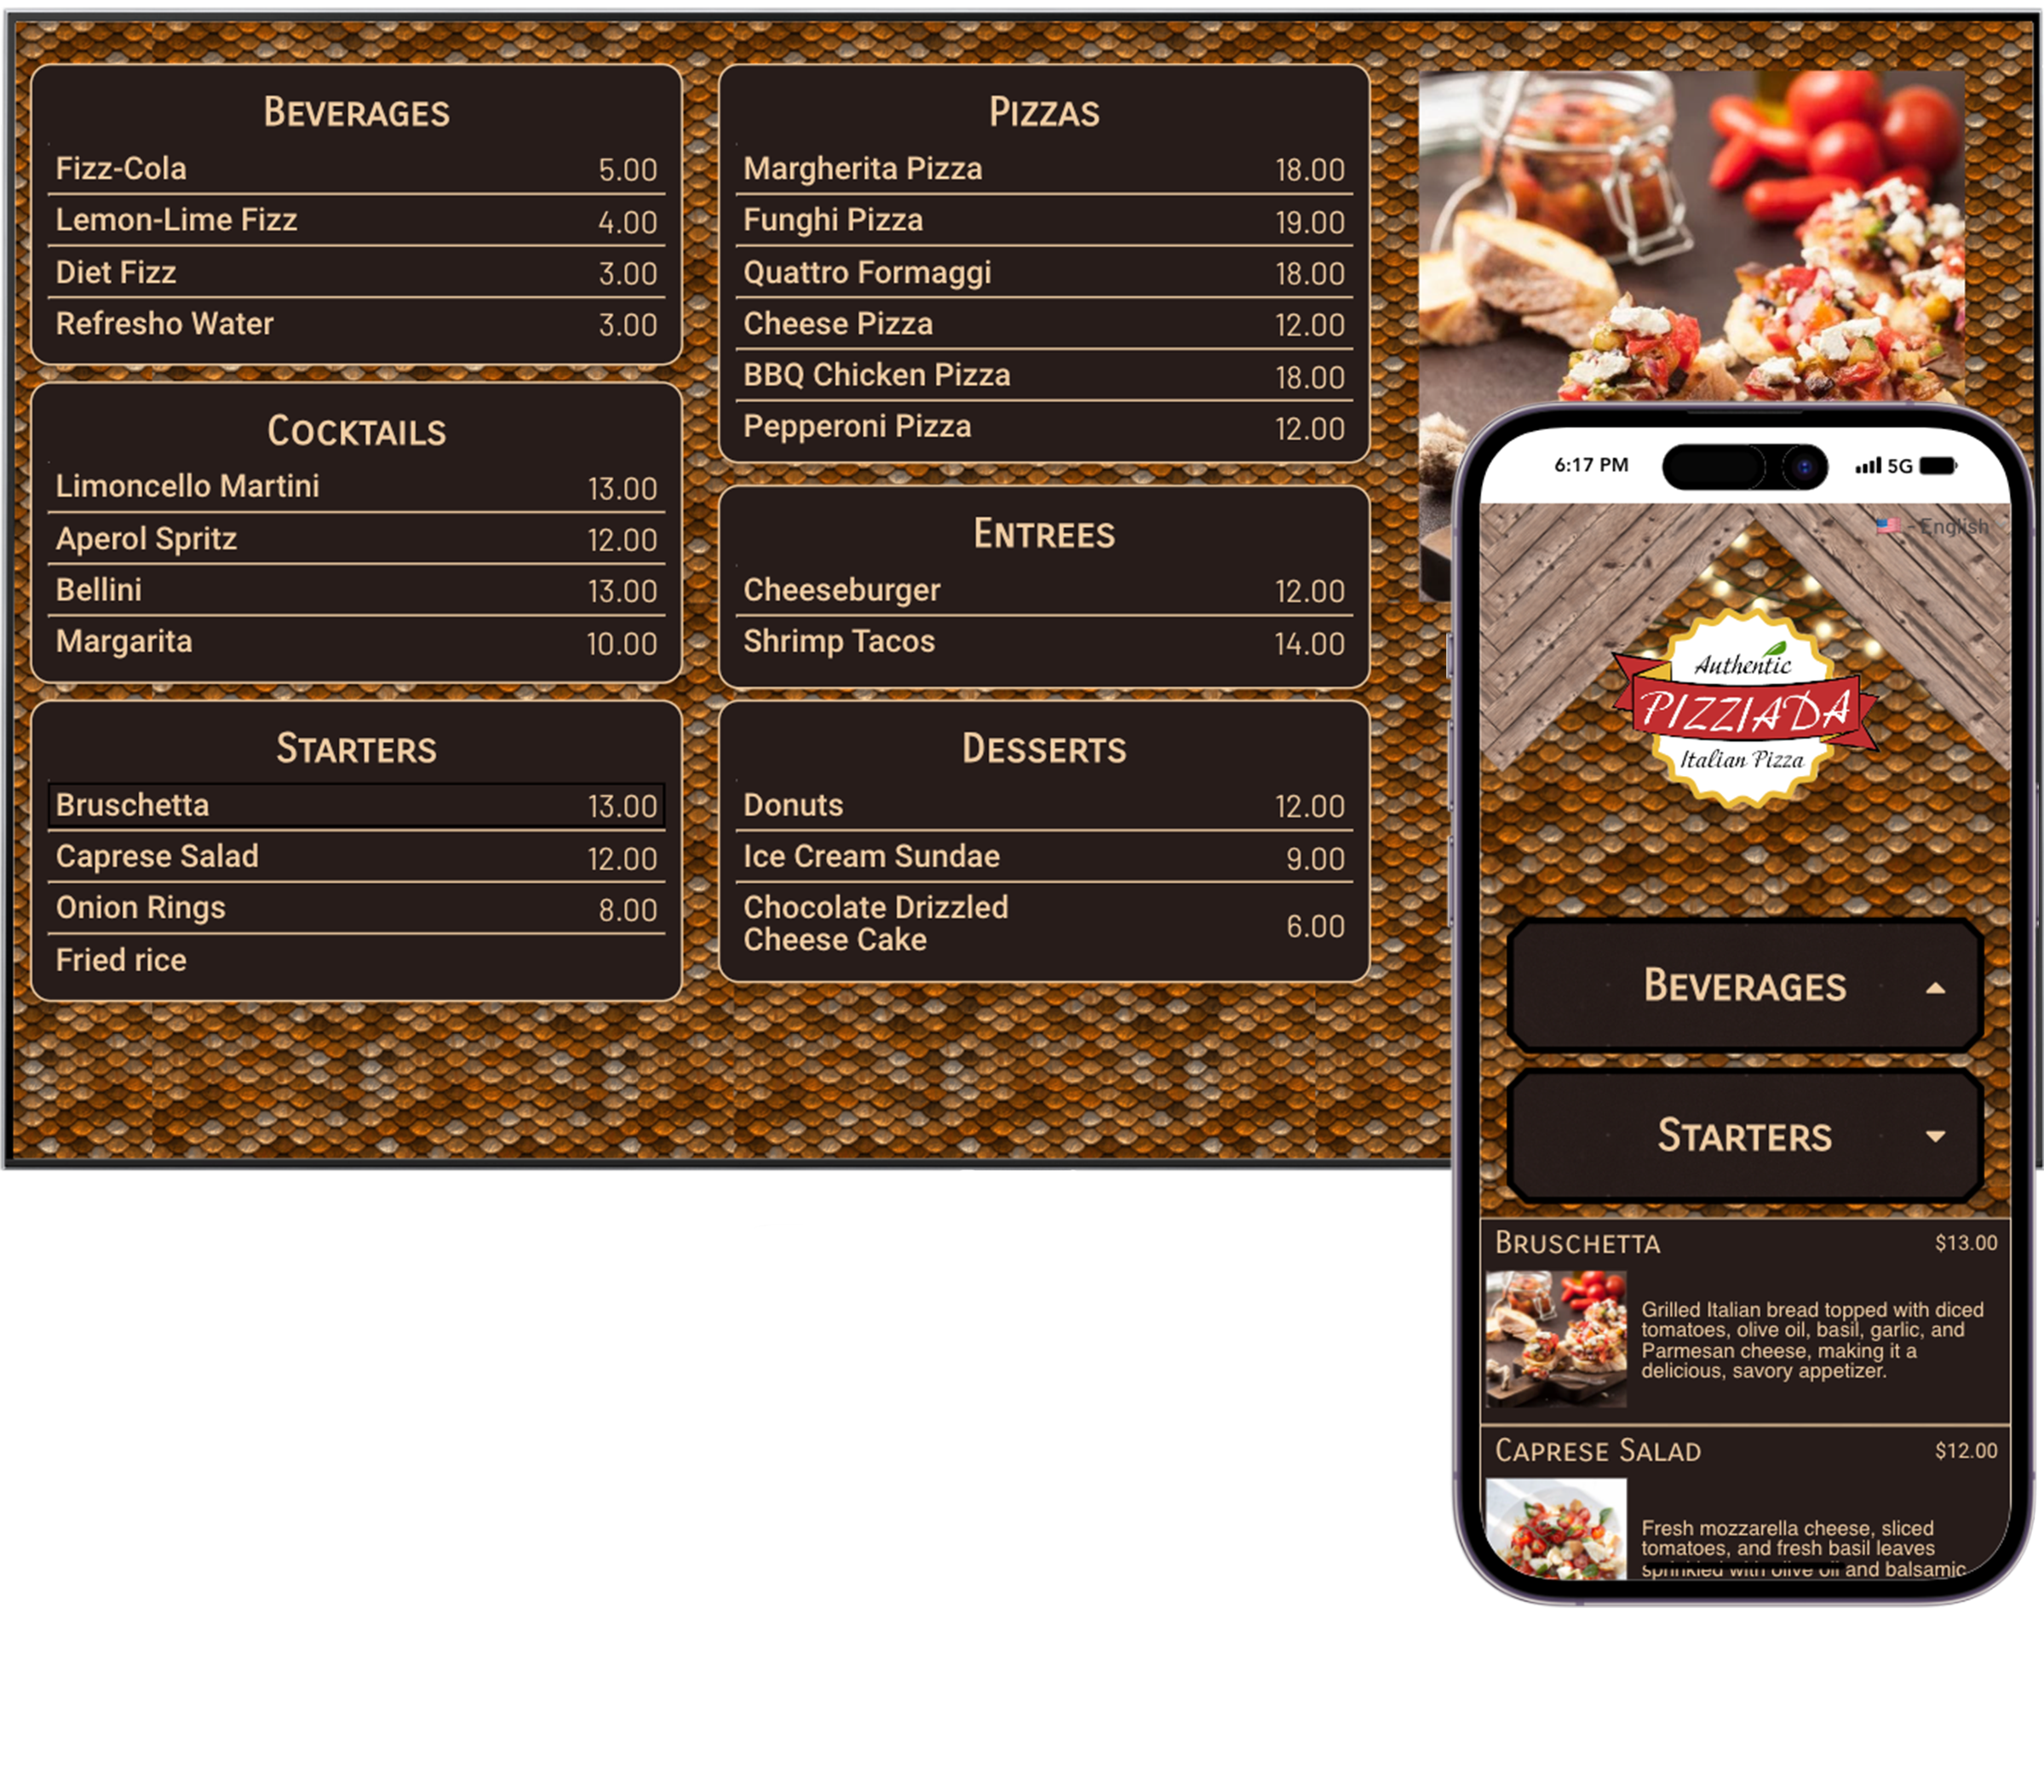 An example of a restaurant's digital signage menu displayed on a brown hexagonal tile background. The menu is divided into sections for Beverages, Pizzas, Cocktails, Entrées, Starters, and Desserts, with prices listed next to each item. A companion mobile phone displays a QR code for the menu, indicating the option for contactless ordering.